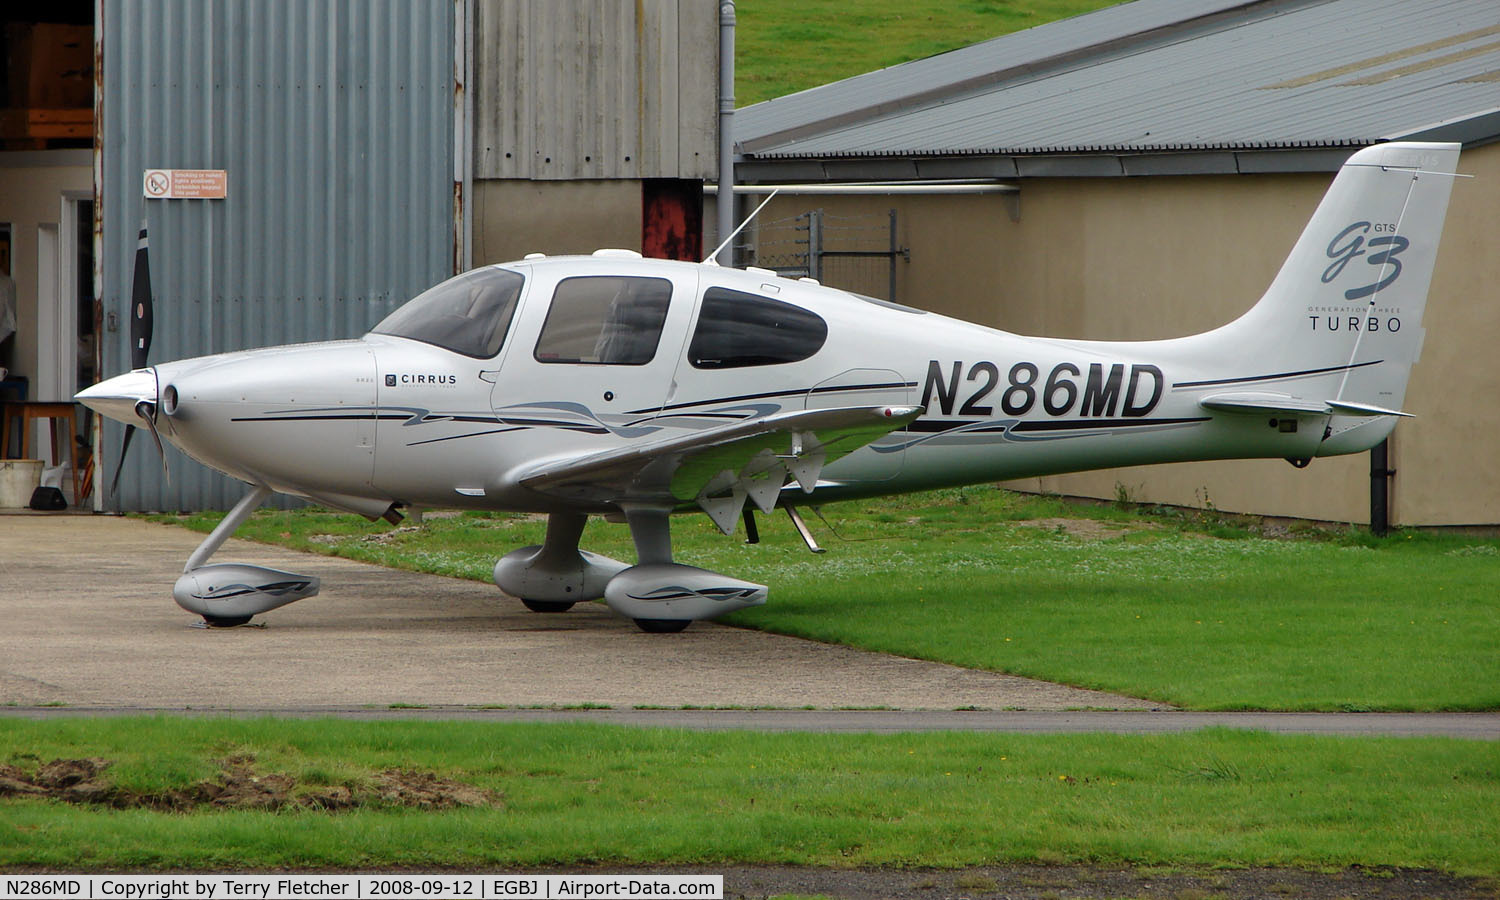 N286MD, 2008 Cirrus SR22 G3 GTS Turbo C/N 3173, Cirrus SR22 noted at Gloucestershire Airport  UK in Sept 2008